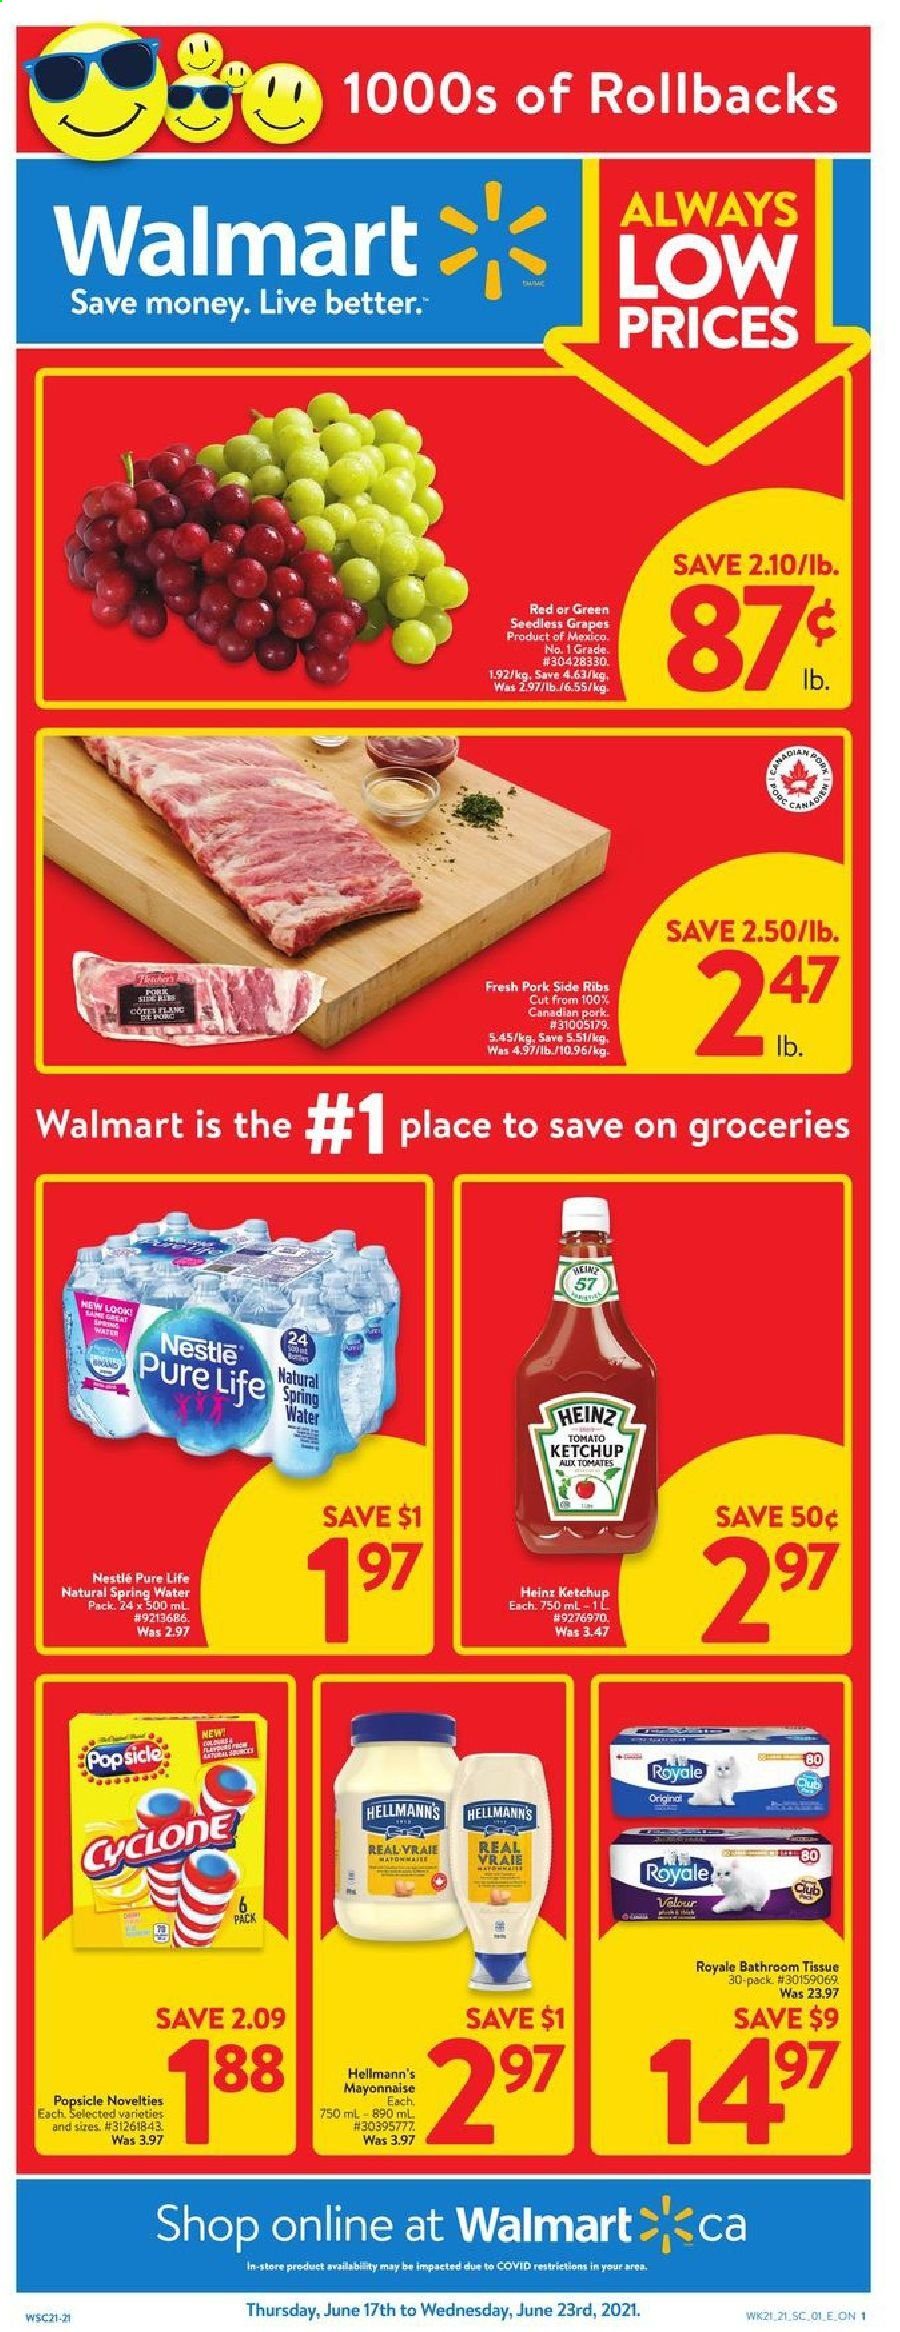 thumbnail - Walmart Flyer - June 17, 2021 - June 23, 2021 - Sales products - grapes, seedless grapes, mayonnaise, Hellmann’s, Heinz, spring water, bath tissue, Nestlé. Page 1.